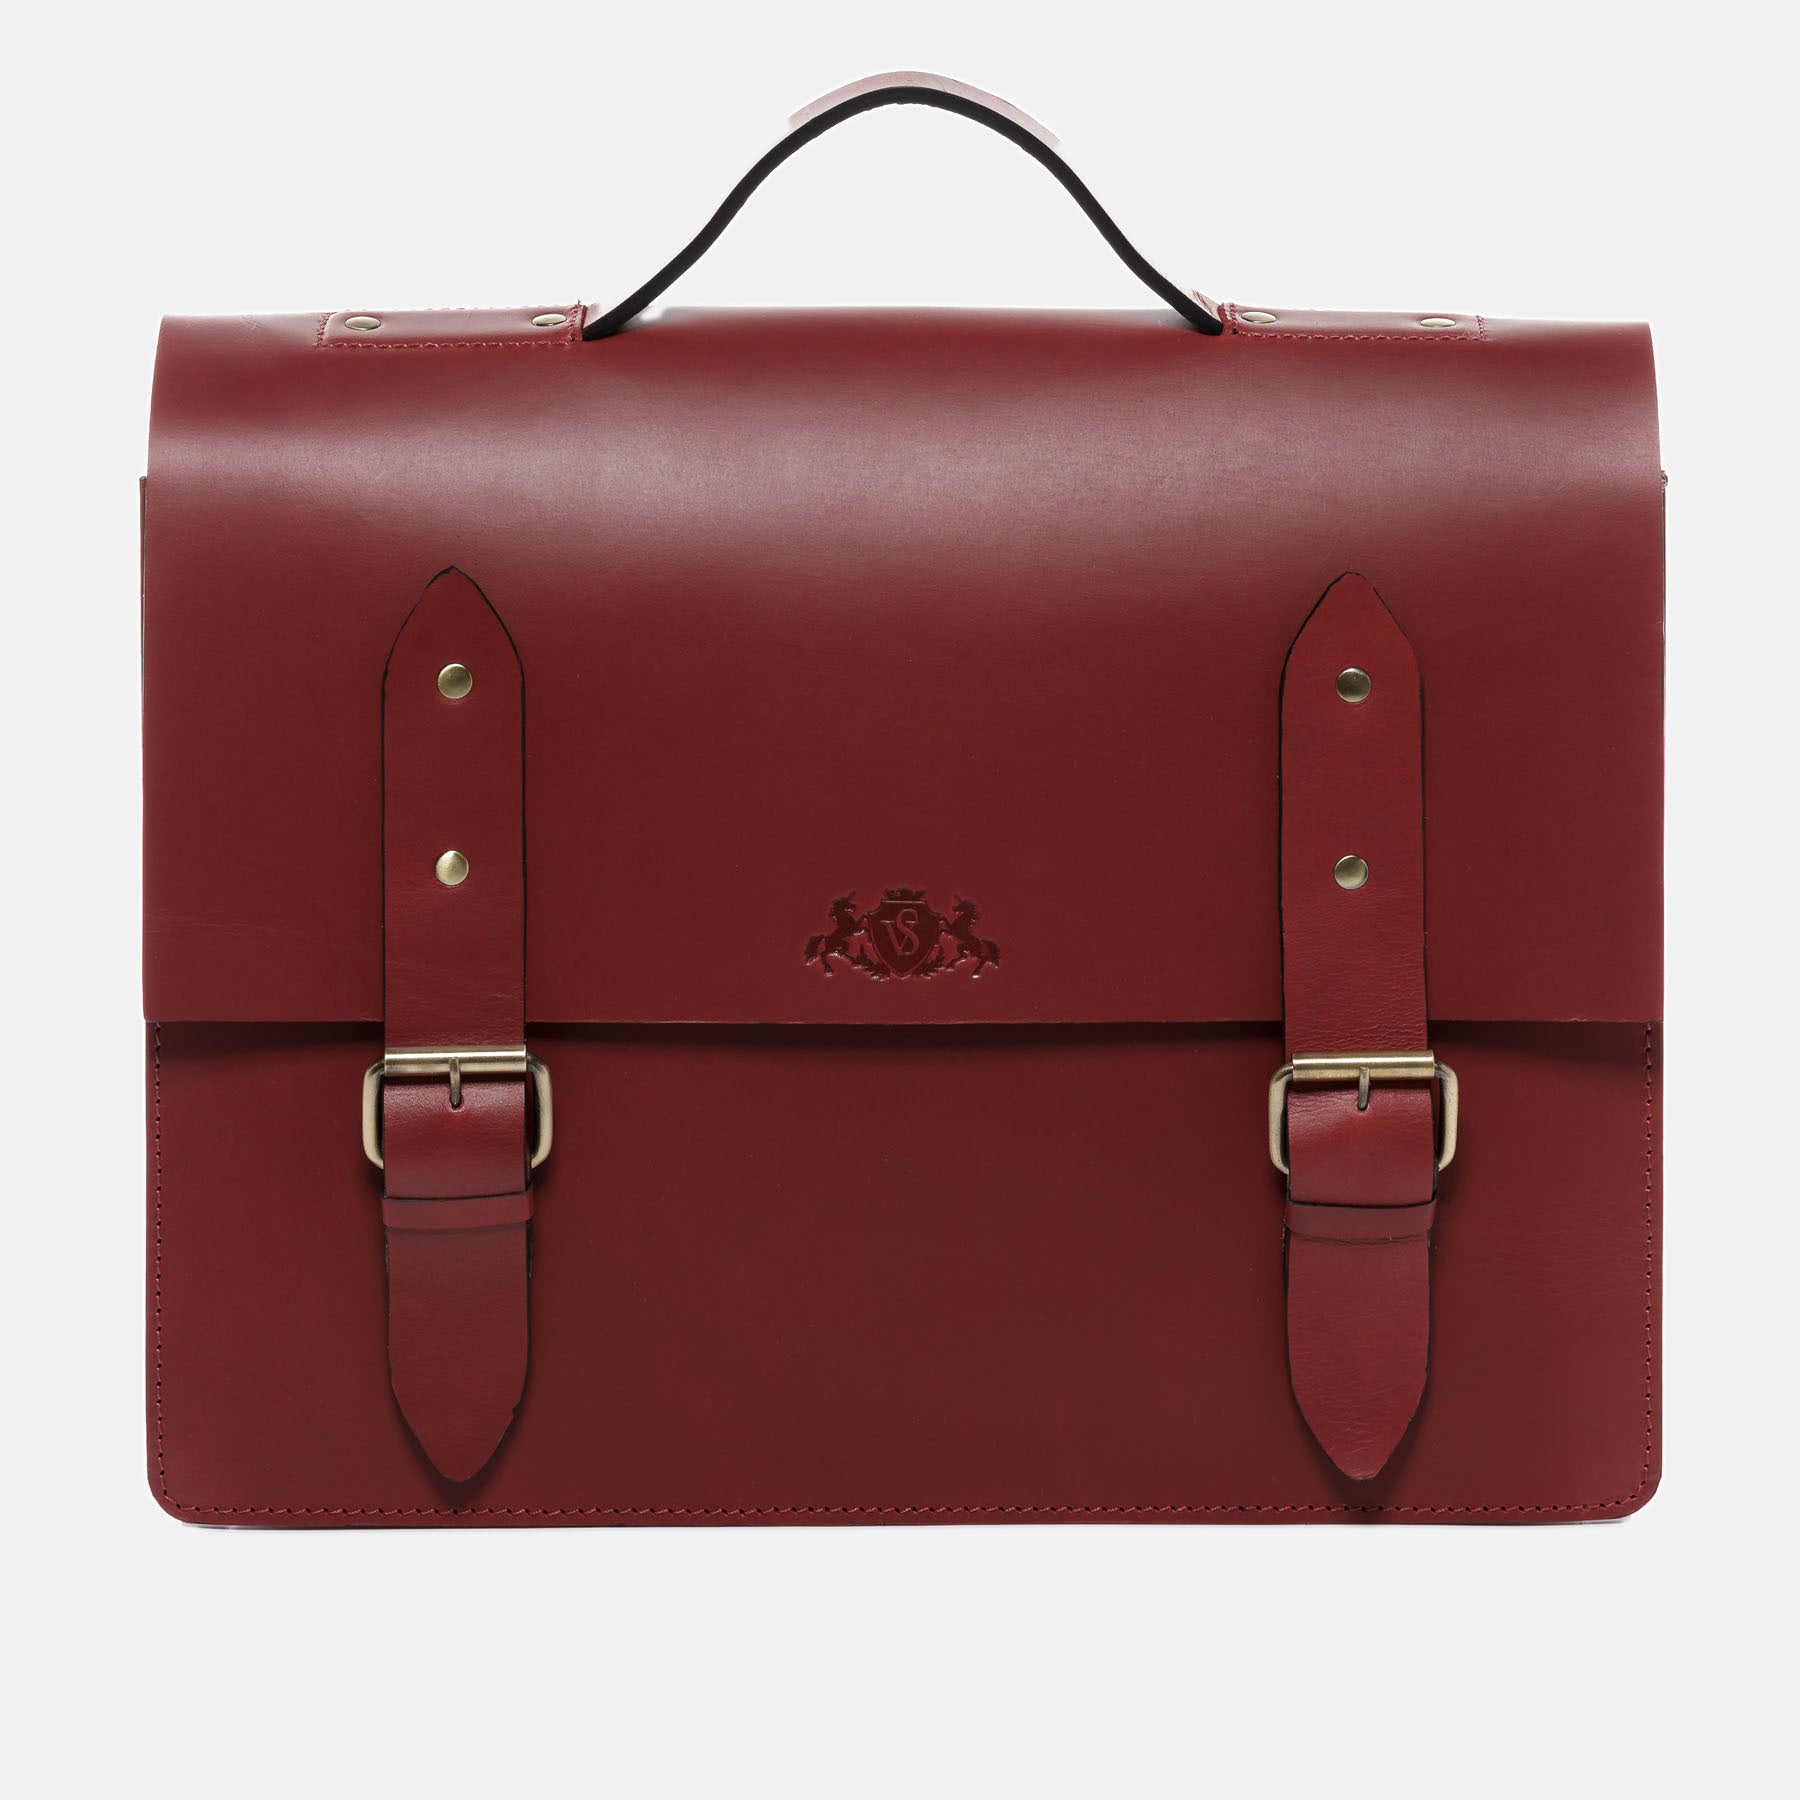 Briefcase BRIGHTON saddle leather red